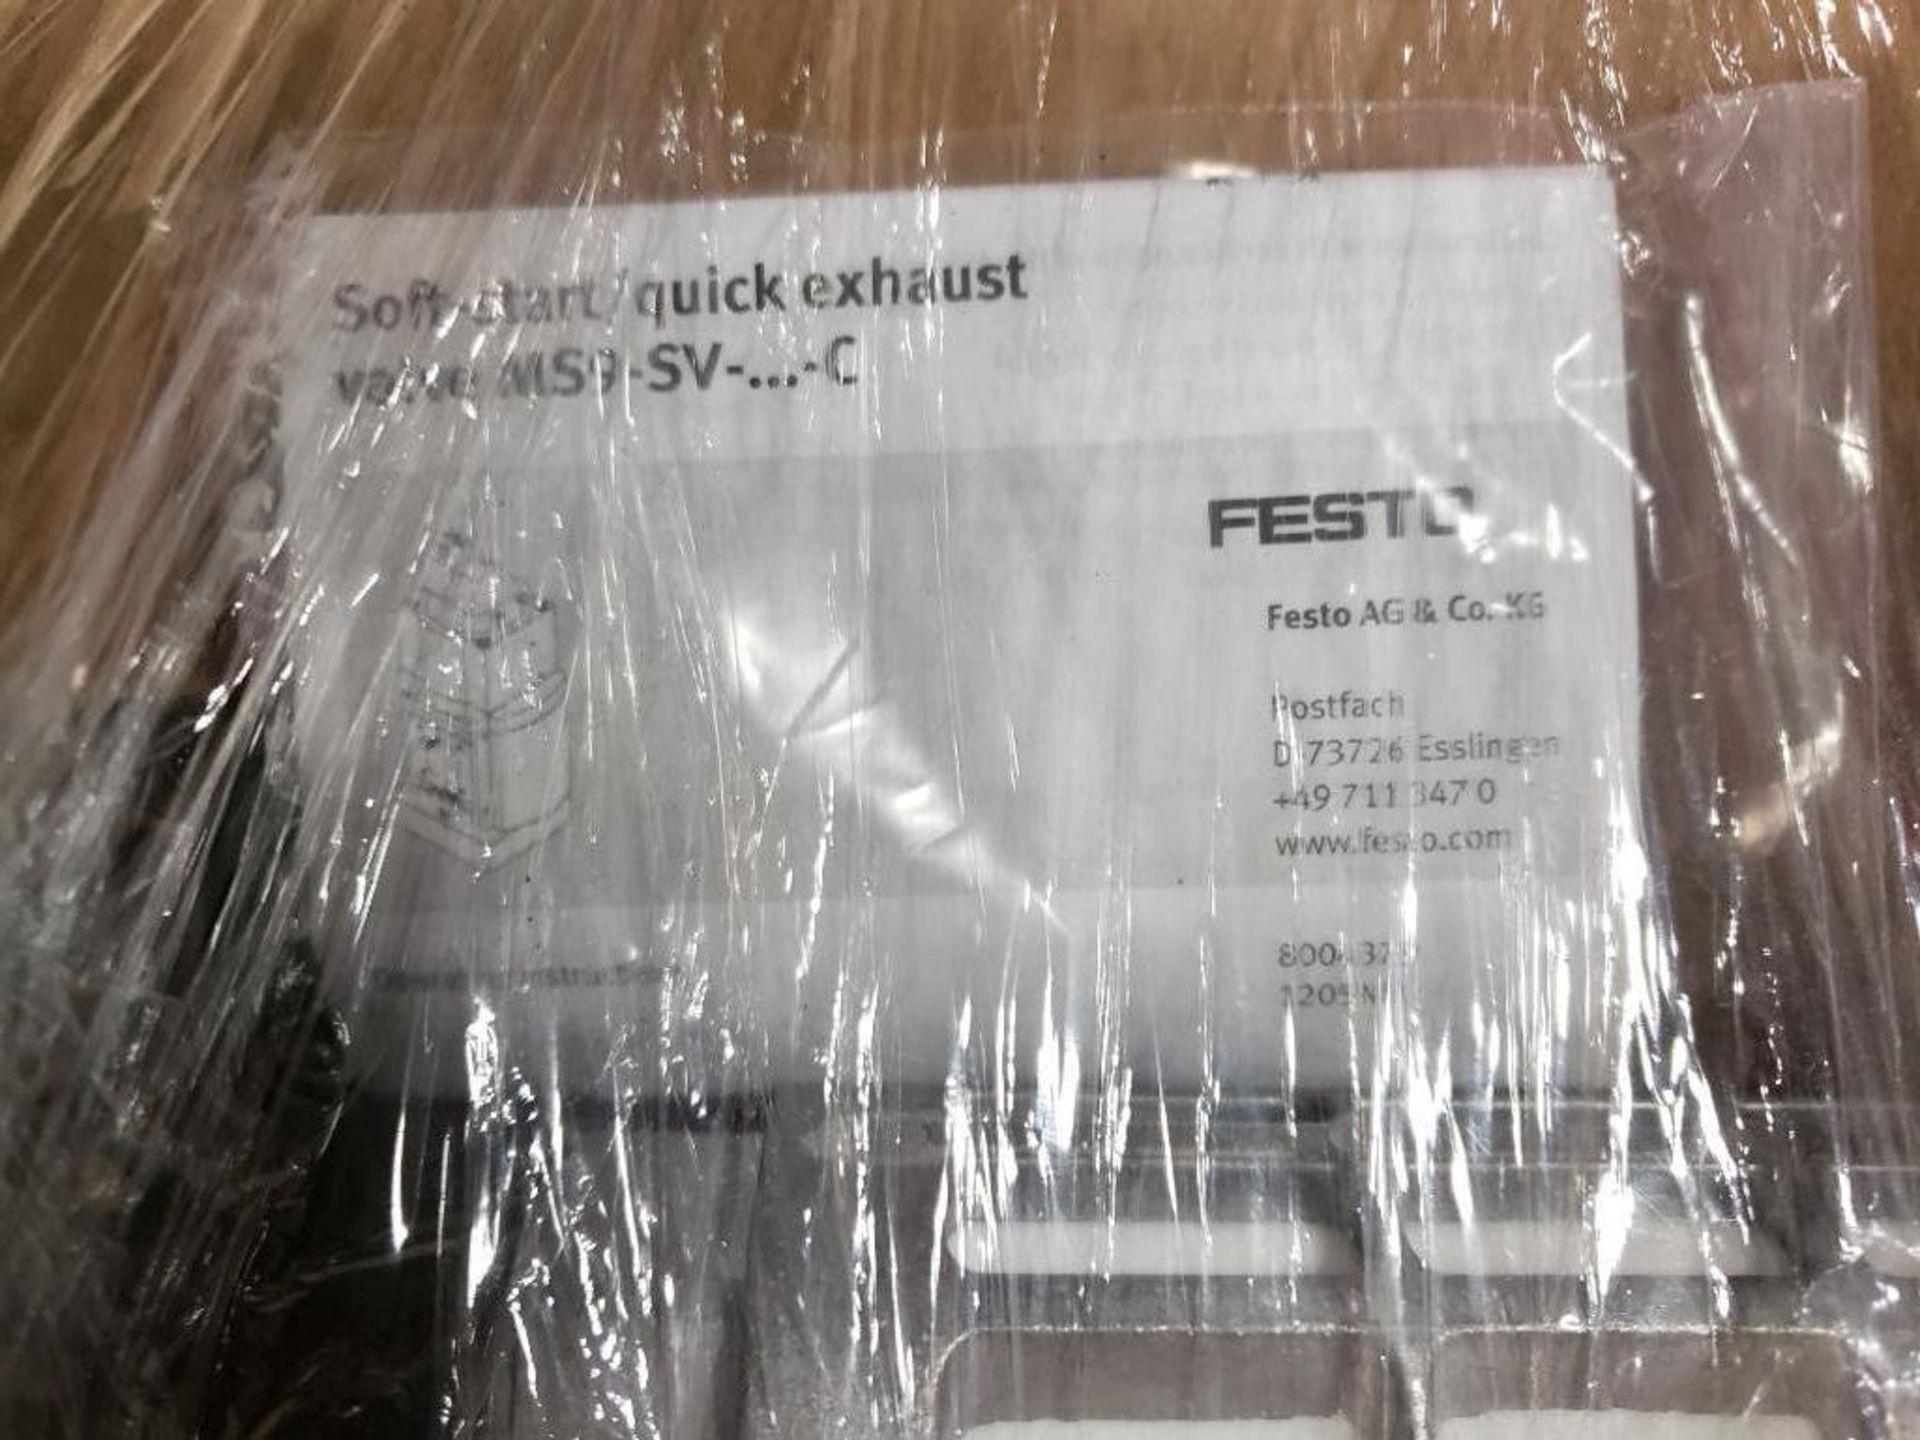 Festo softstart quick exhaust MS9-S0-AoD-C-V24-S-VS. New in packaging. - Image 4 of 6